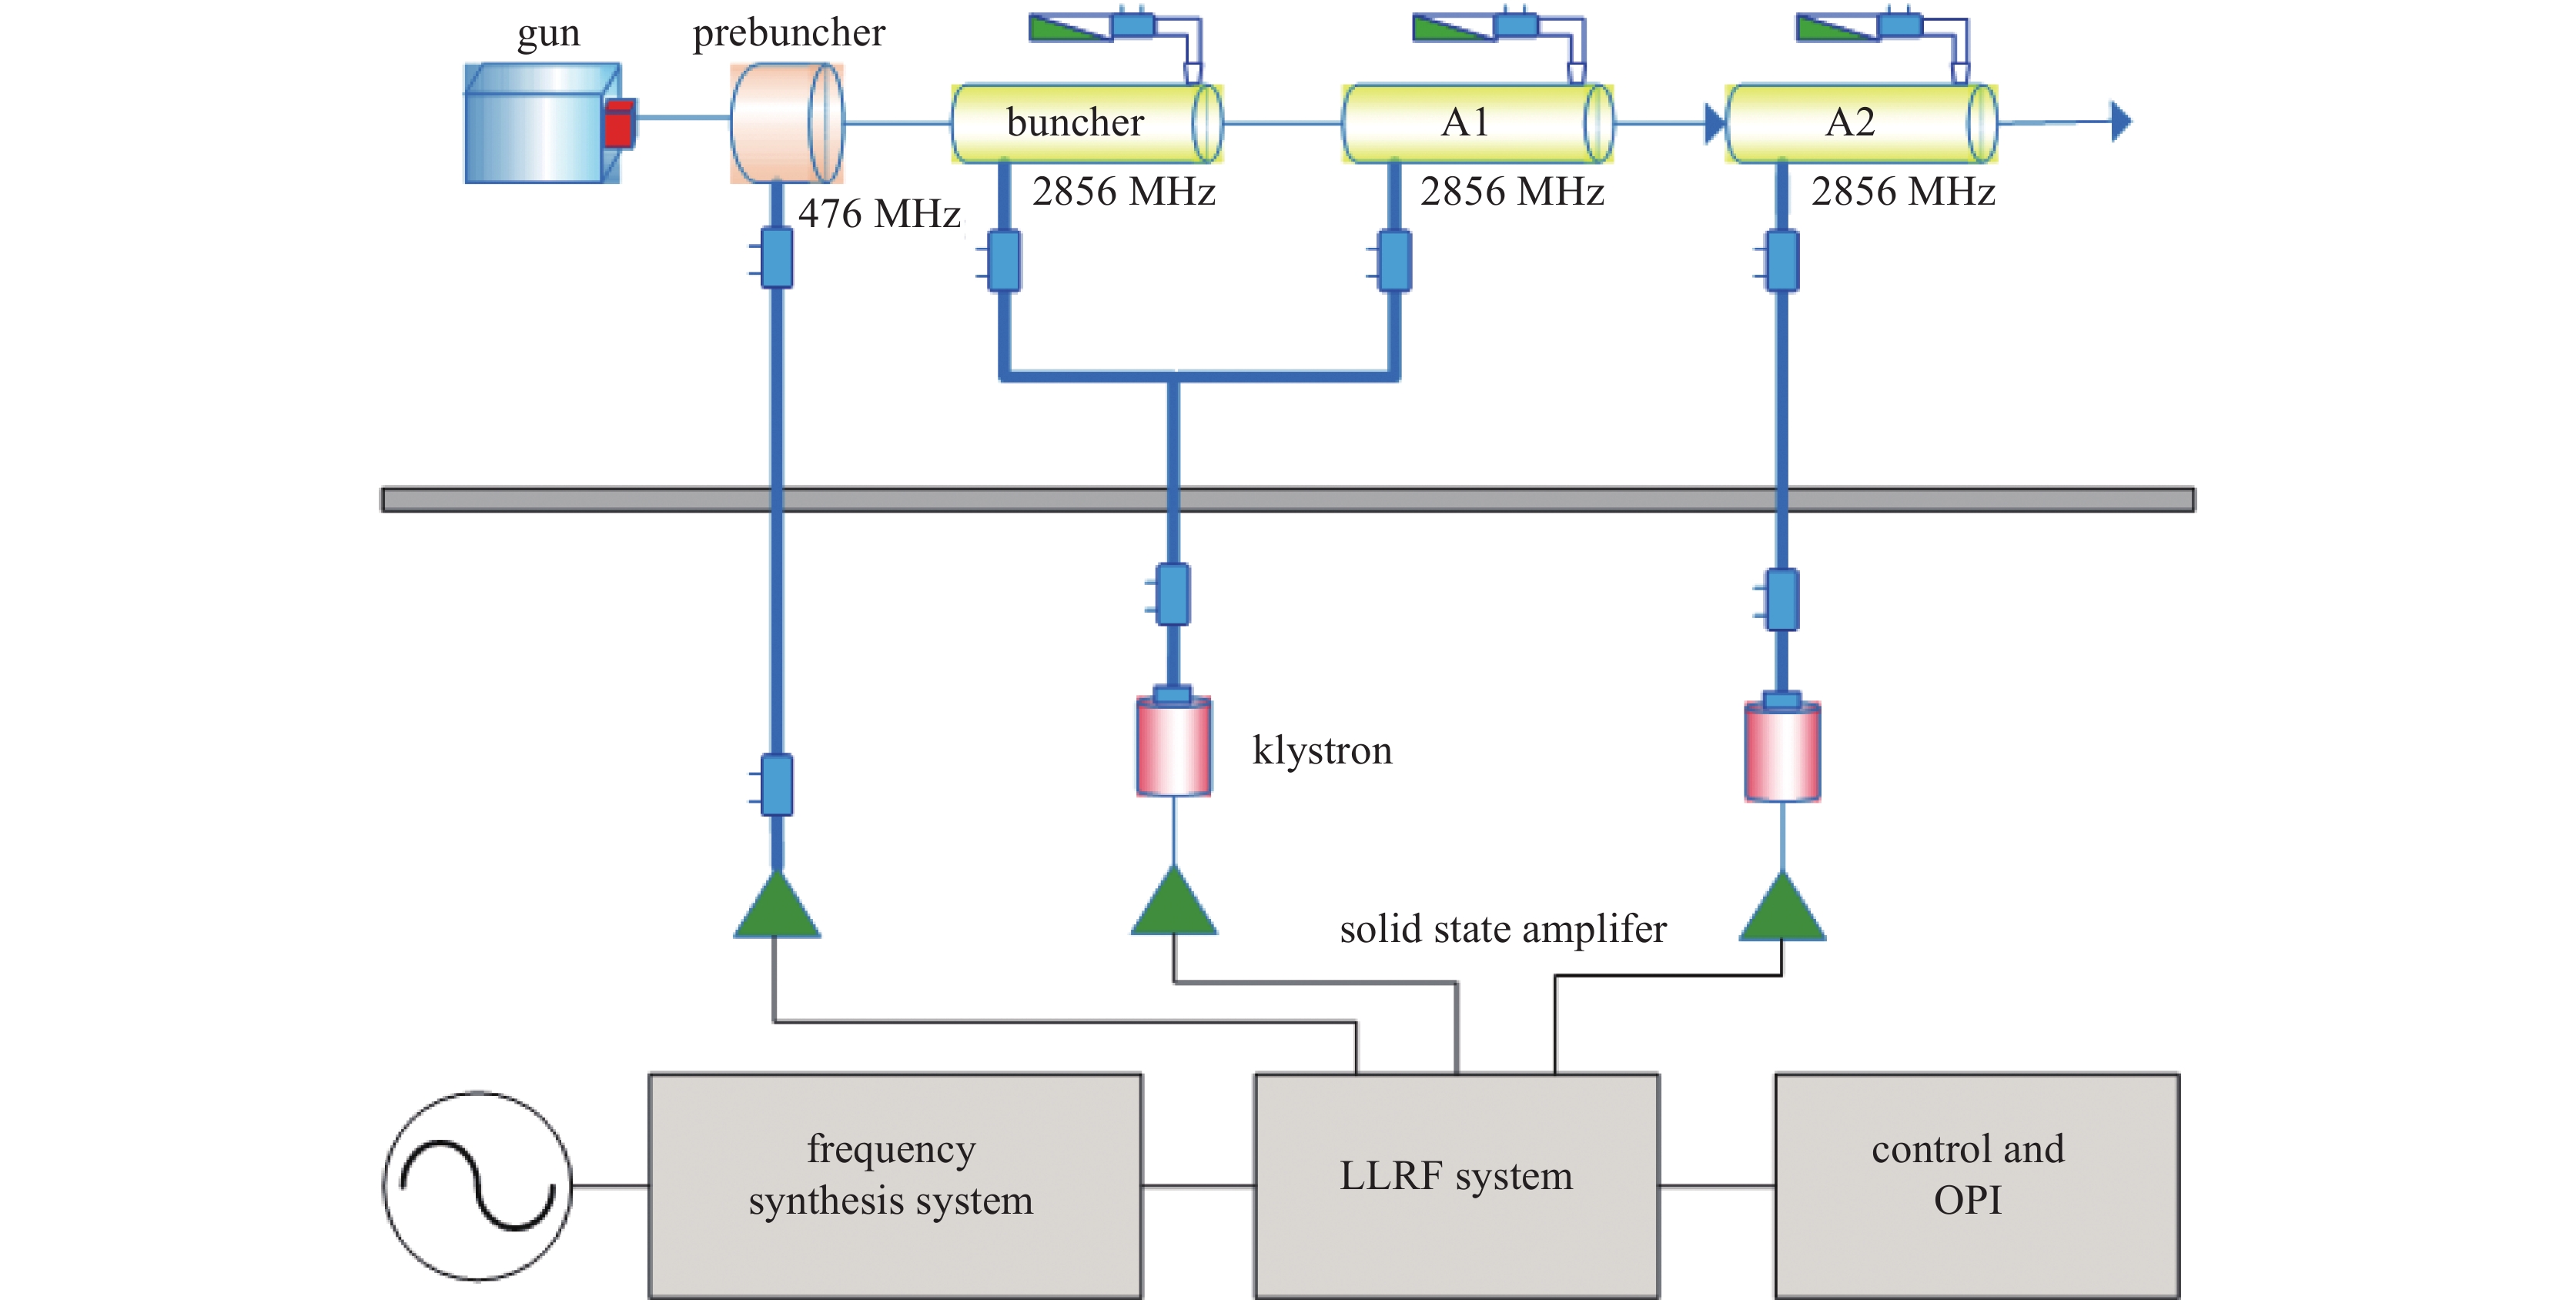 Layout of the linear accelerator of Hefei Infrared Free Electron Laser (IR-FEL)